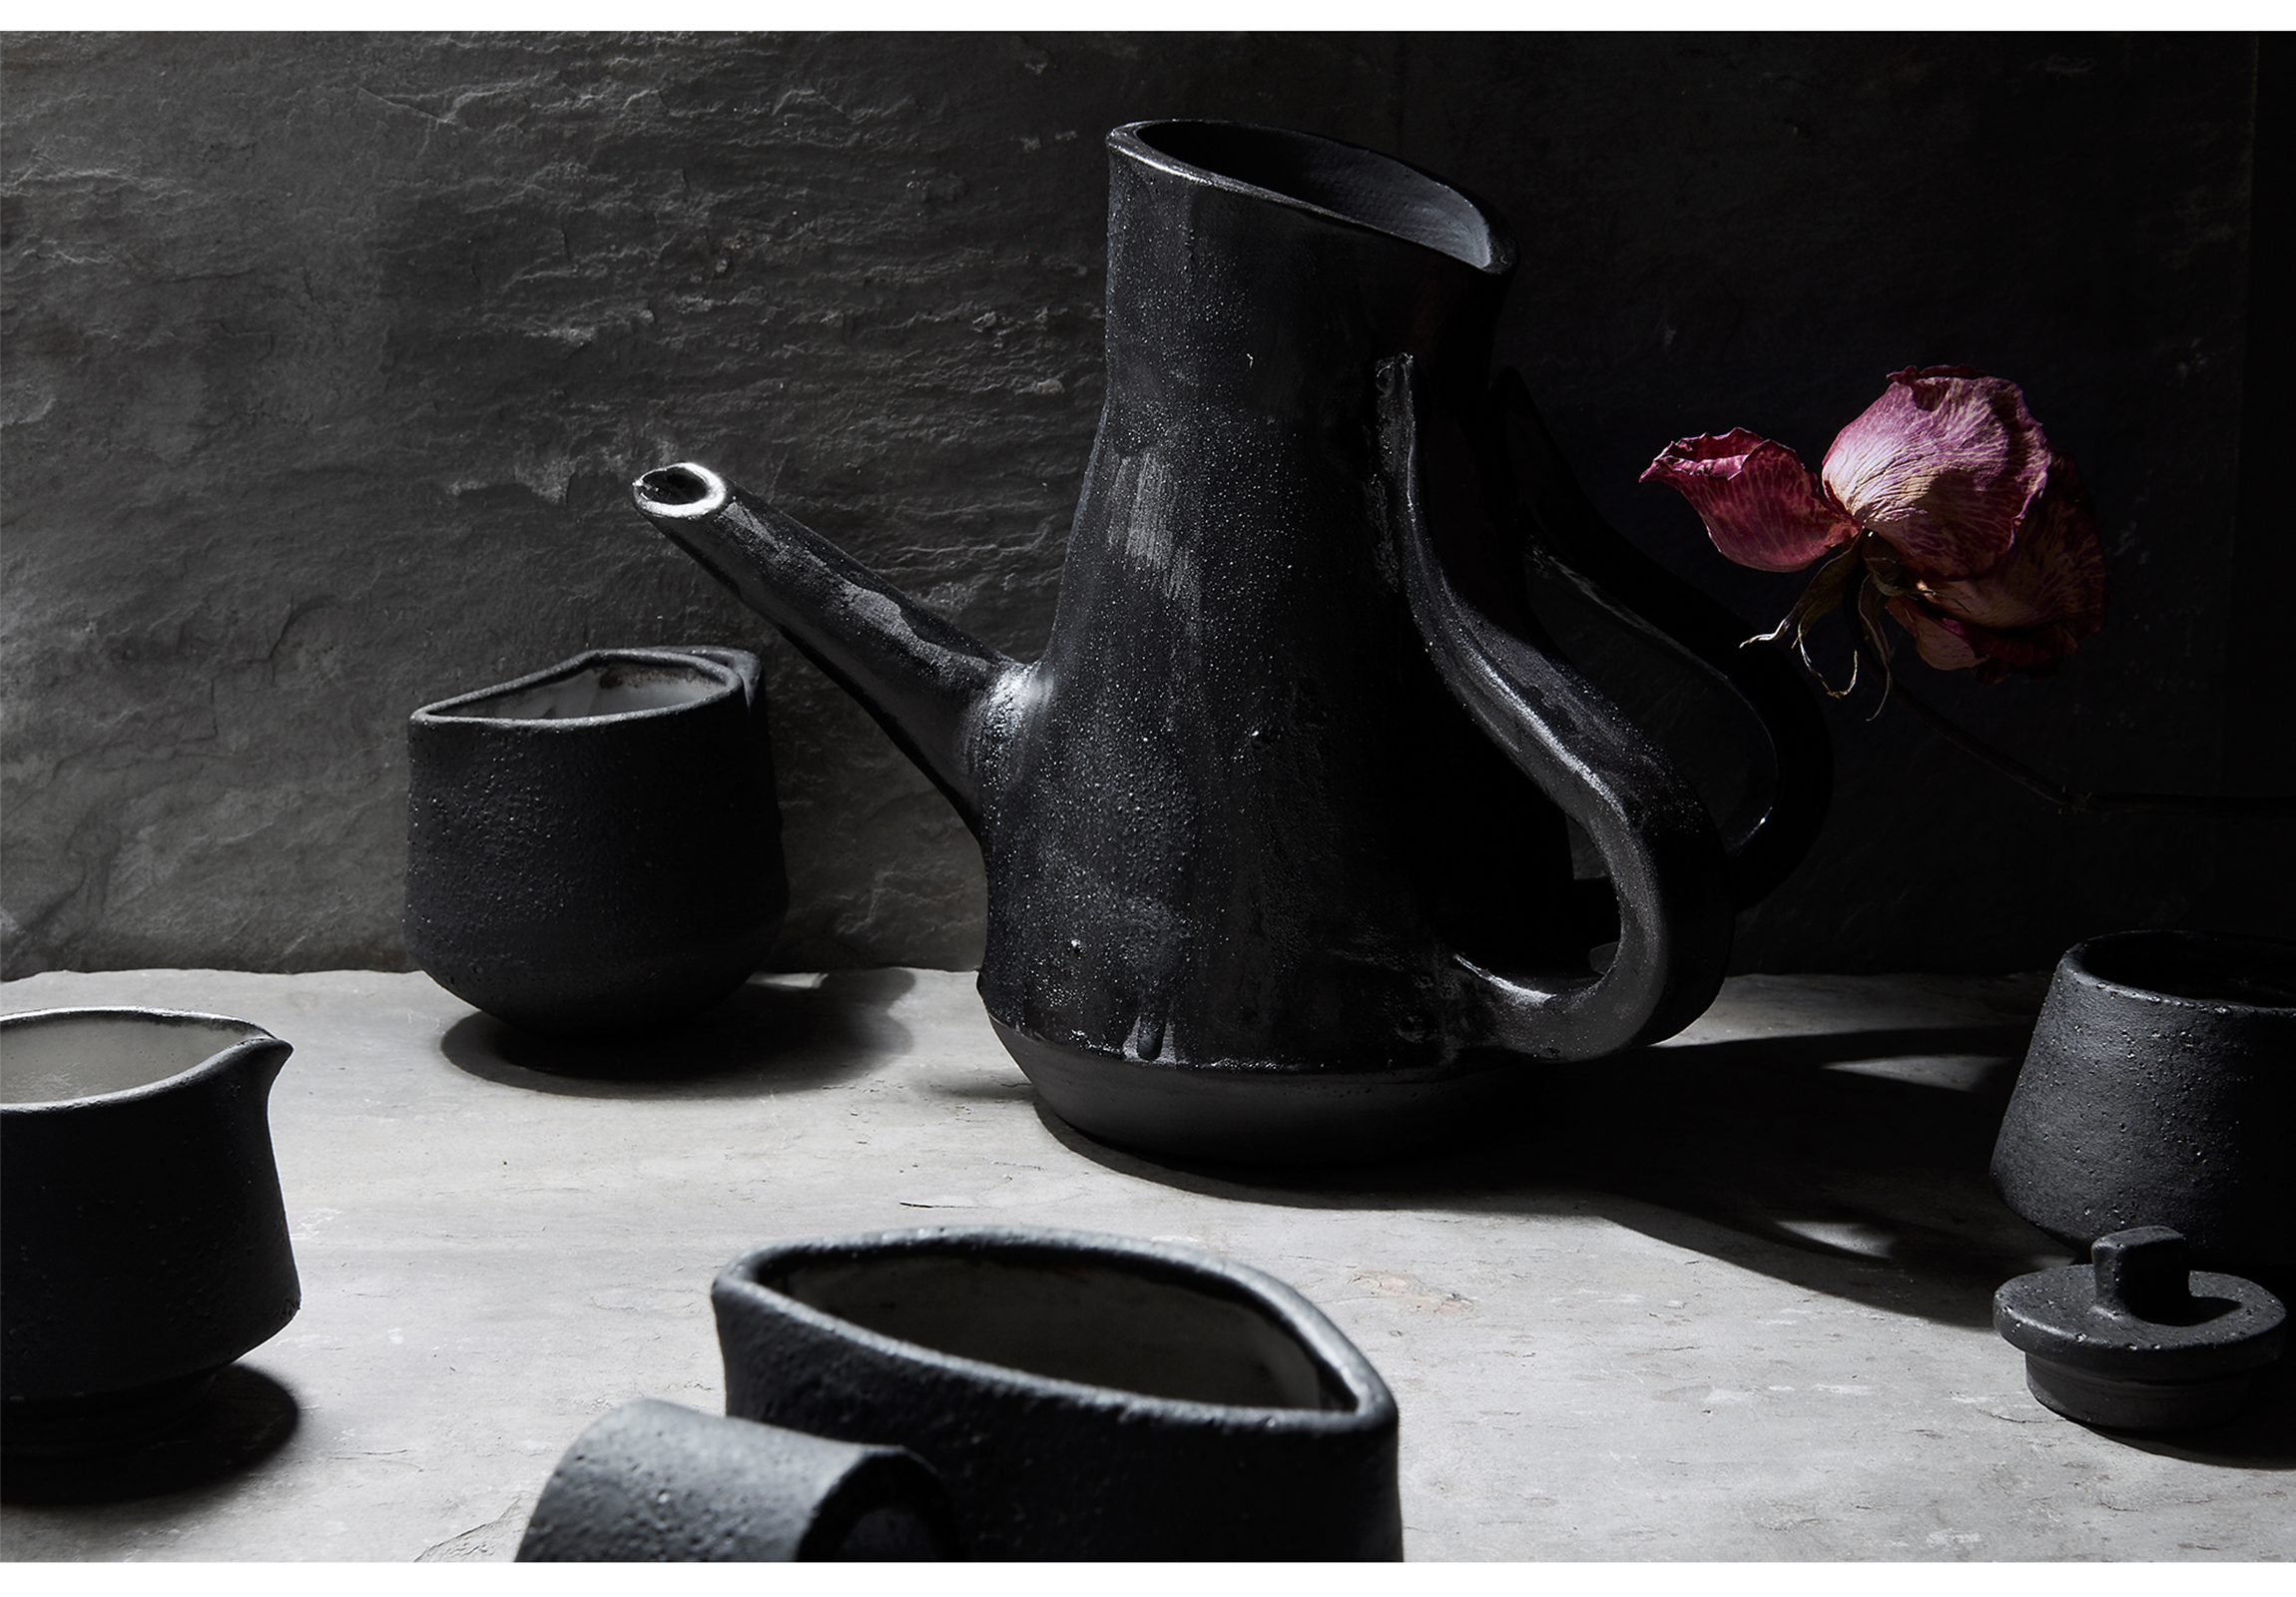 Black glazed tea set on white table with black background and a purple flower